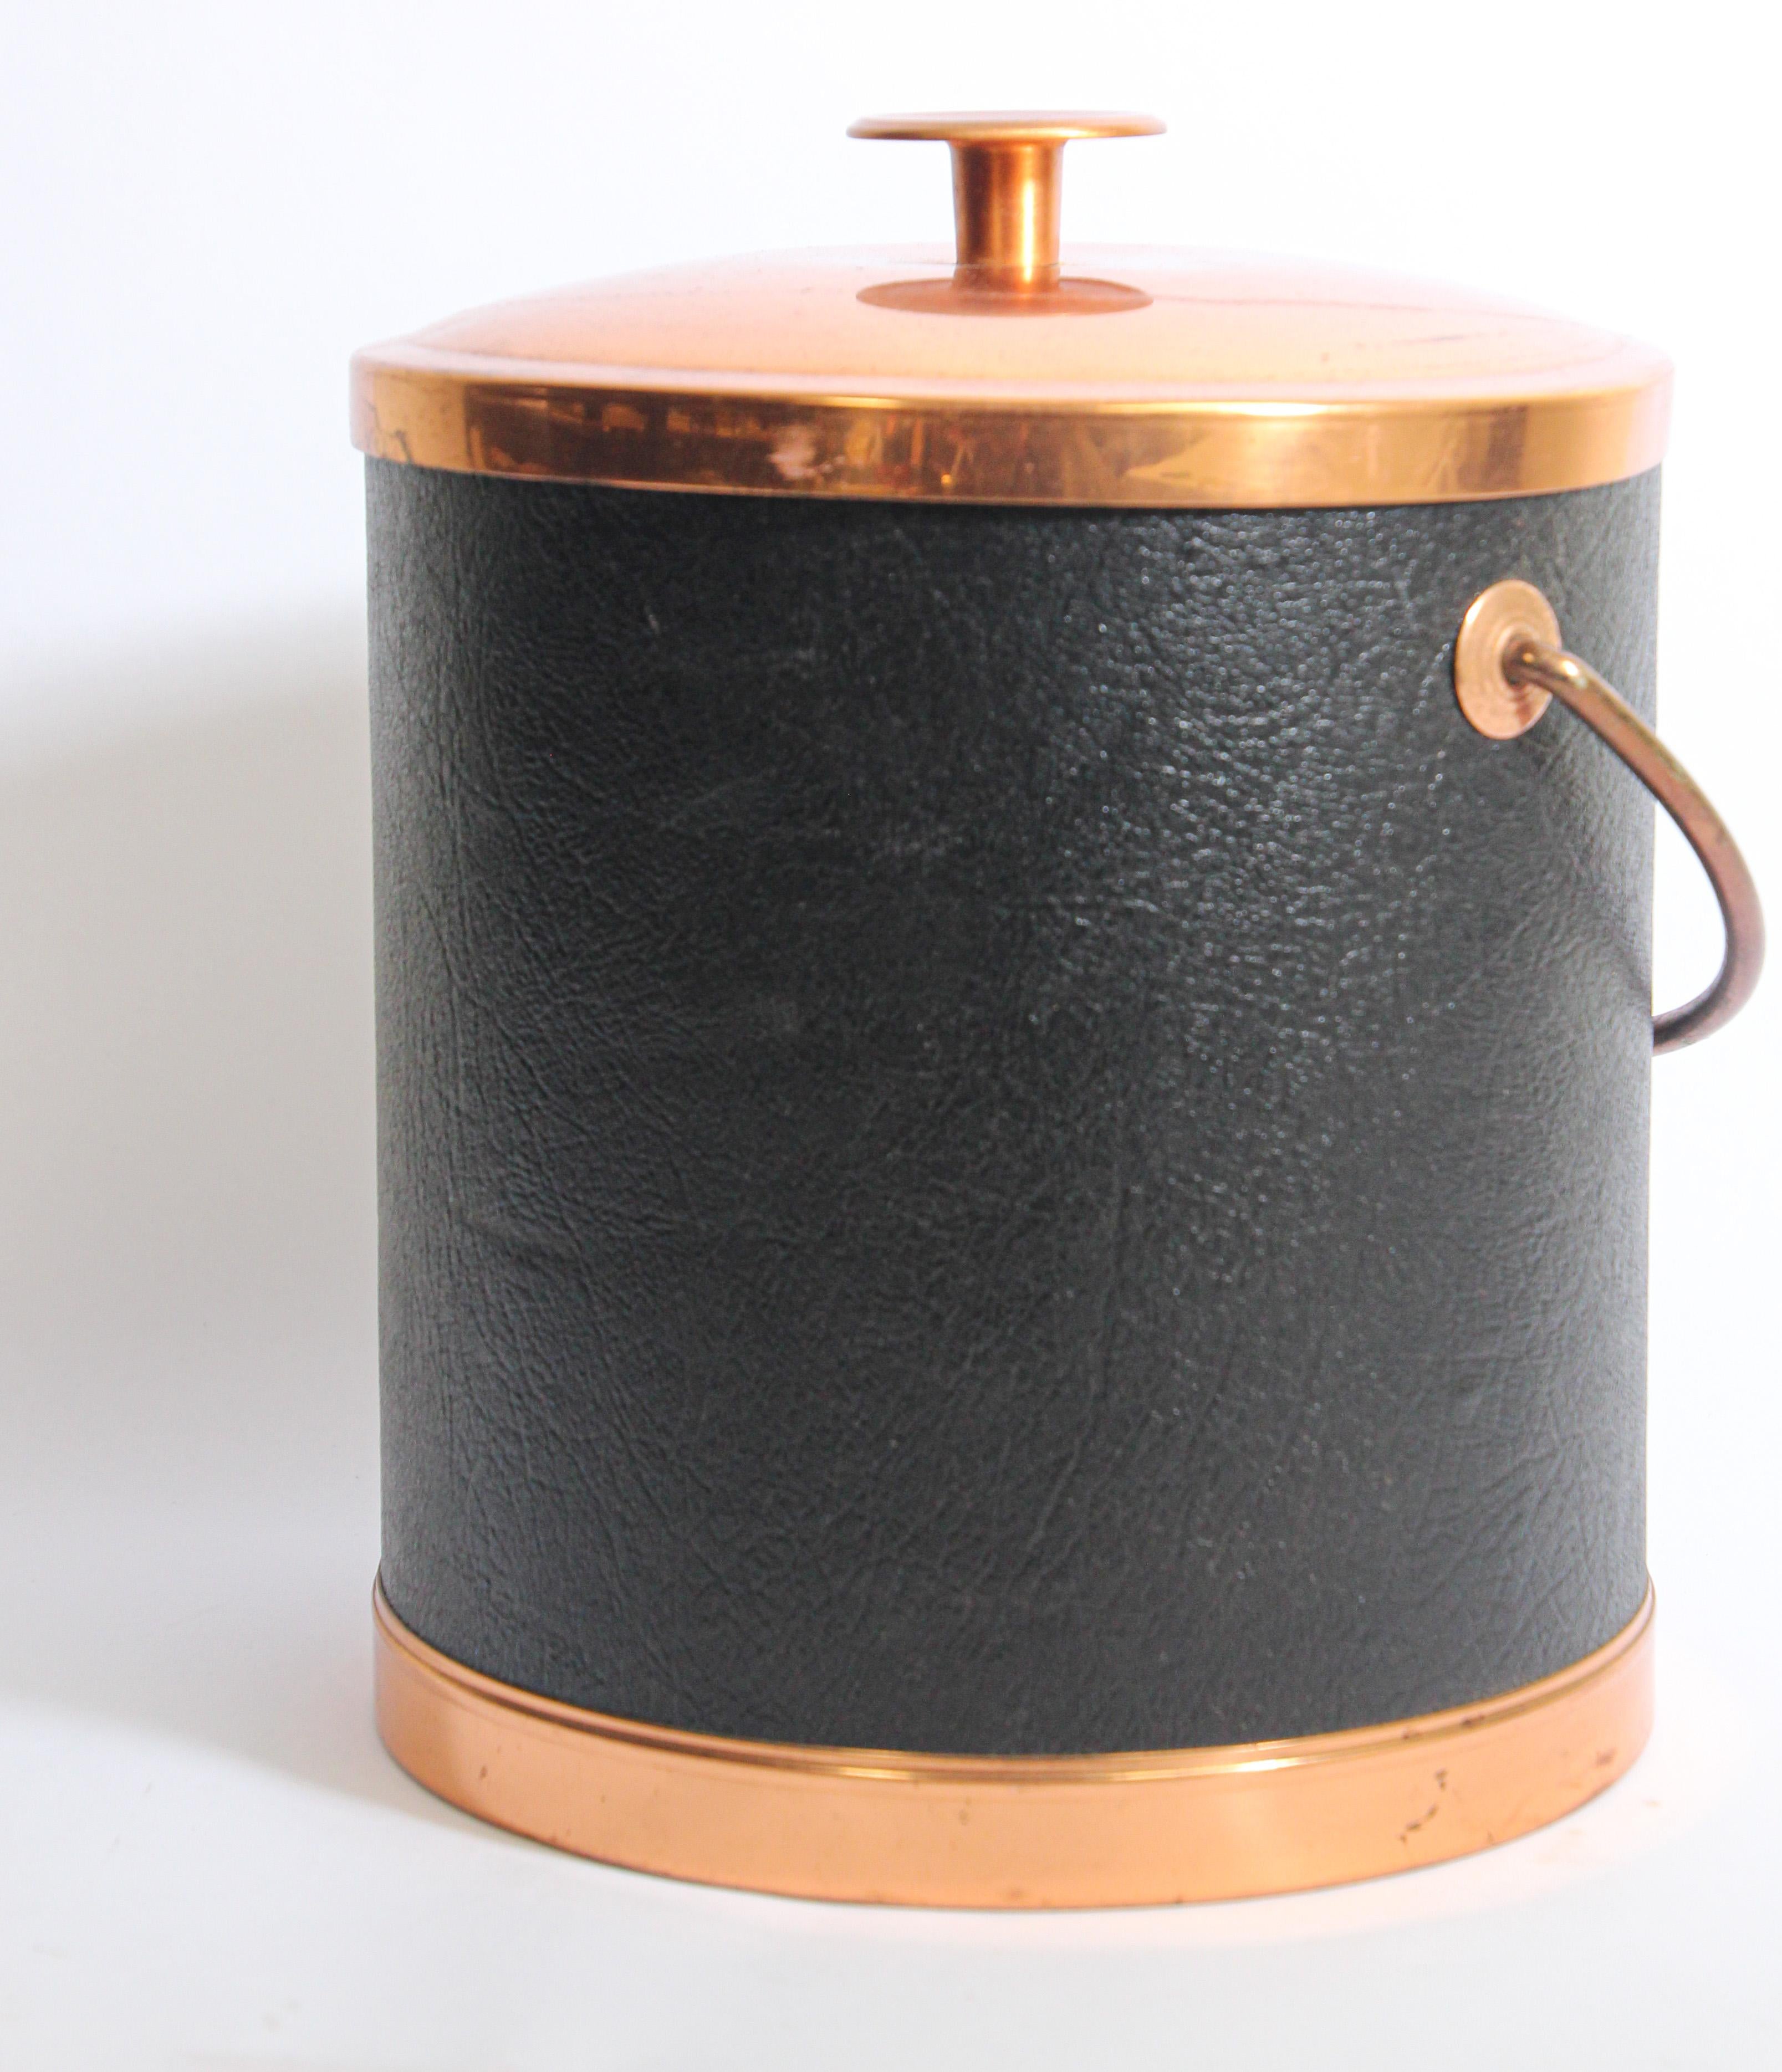 Vintage Copper craft Guild Mid-Century Modern black vinyl covered ice bucket.
The cover and handle are made in copper metal.
Made in USA.
Great gift for him.
Top cover shows some wear.
Hand made in the US by Copper craft Guild, original tag